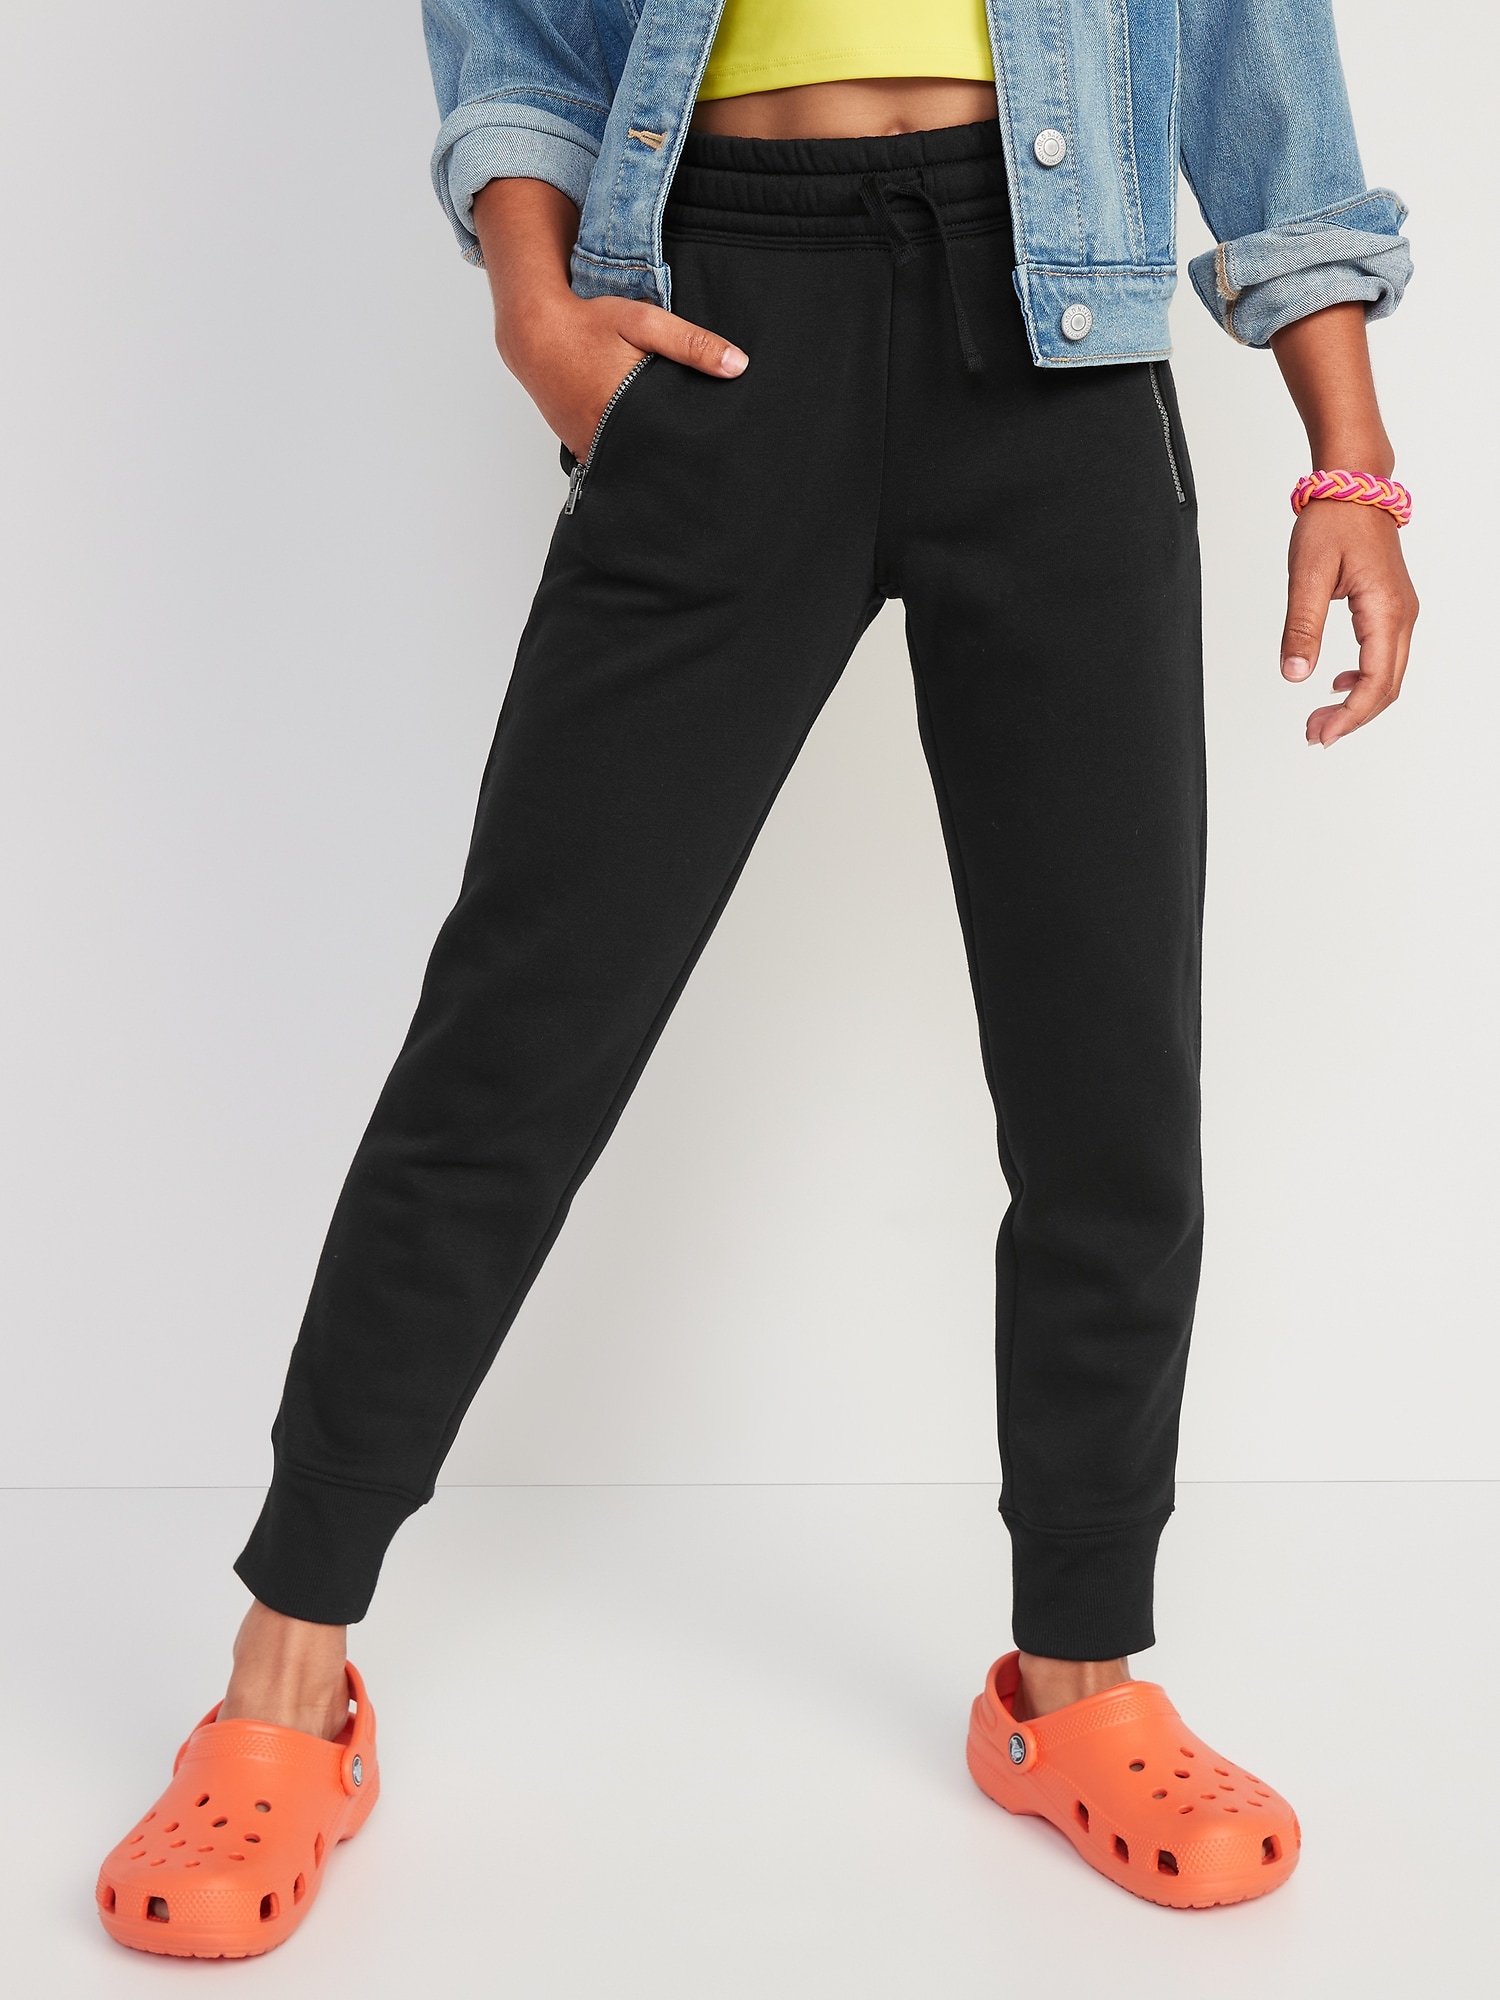 French Terry Jogger Pants with Pockets - 31802 – My Own Design